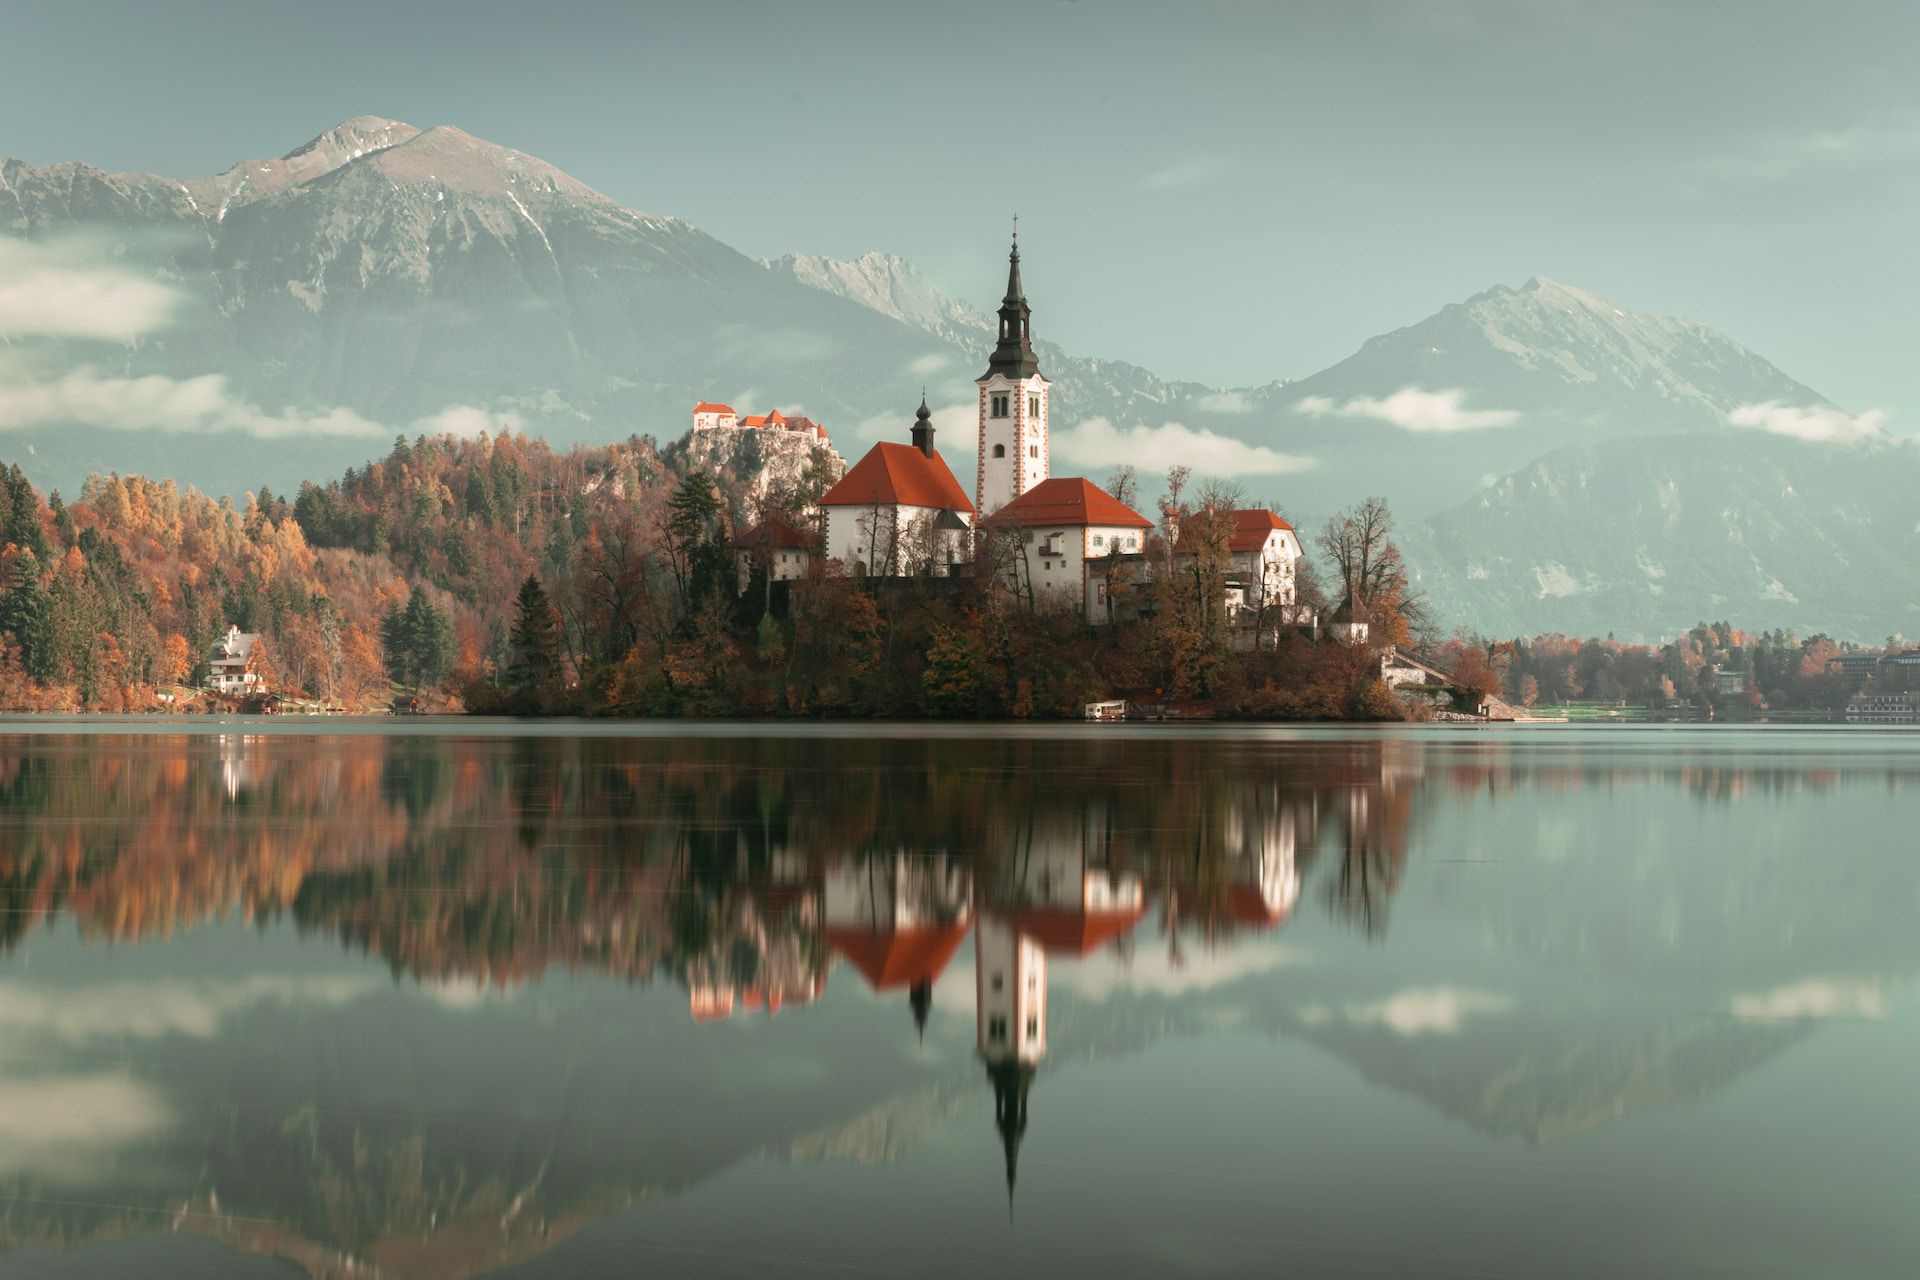 A castle in the middle of Lake Bled, Slovenia